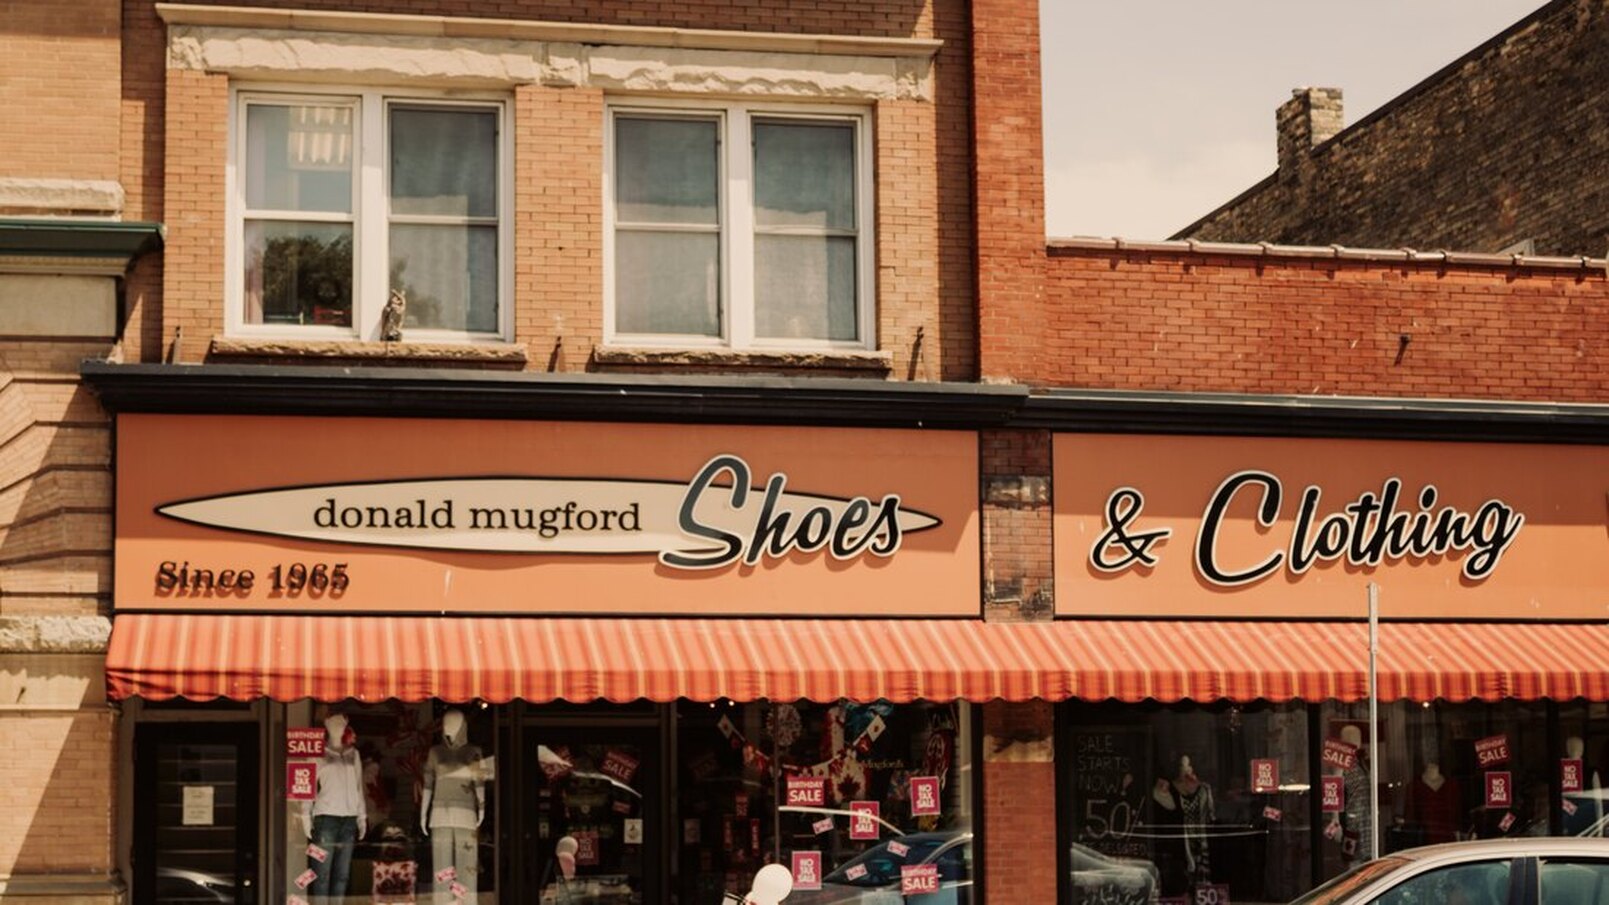 This is the store front of Mugford's. There is an orange and red awning above the store windows. The sign has an orange background and in the bottom left corner of it, it says 